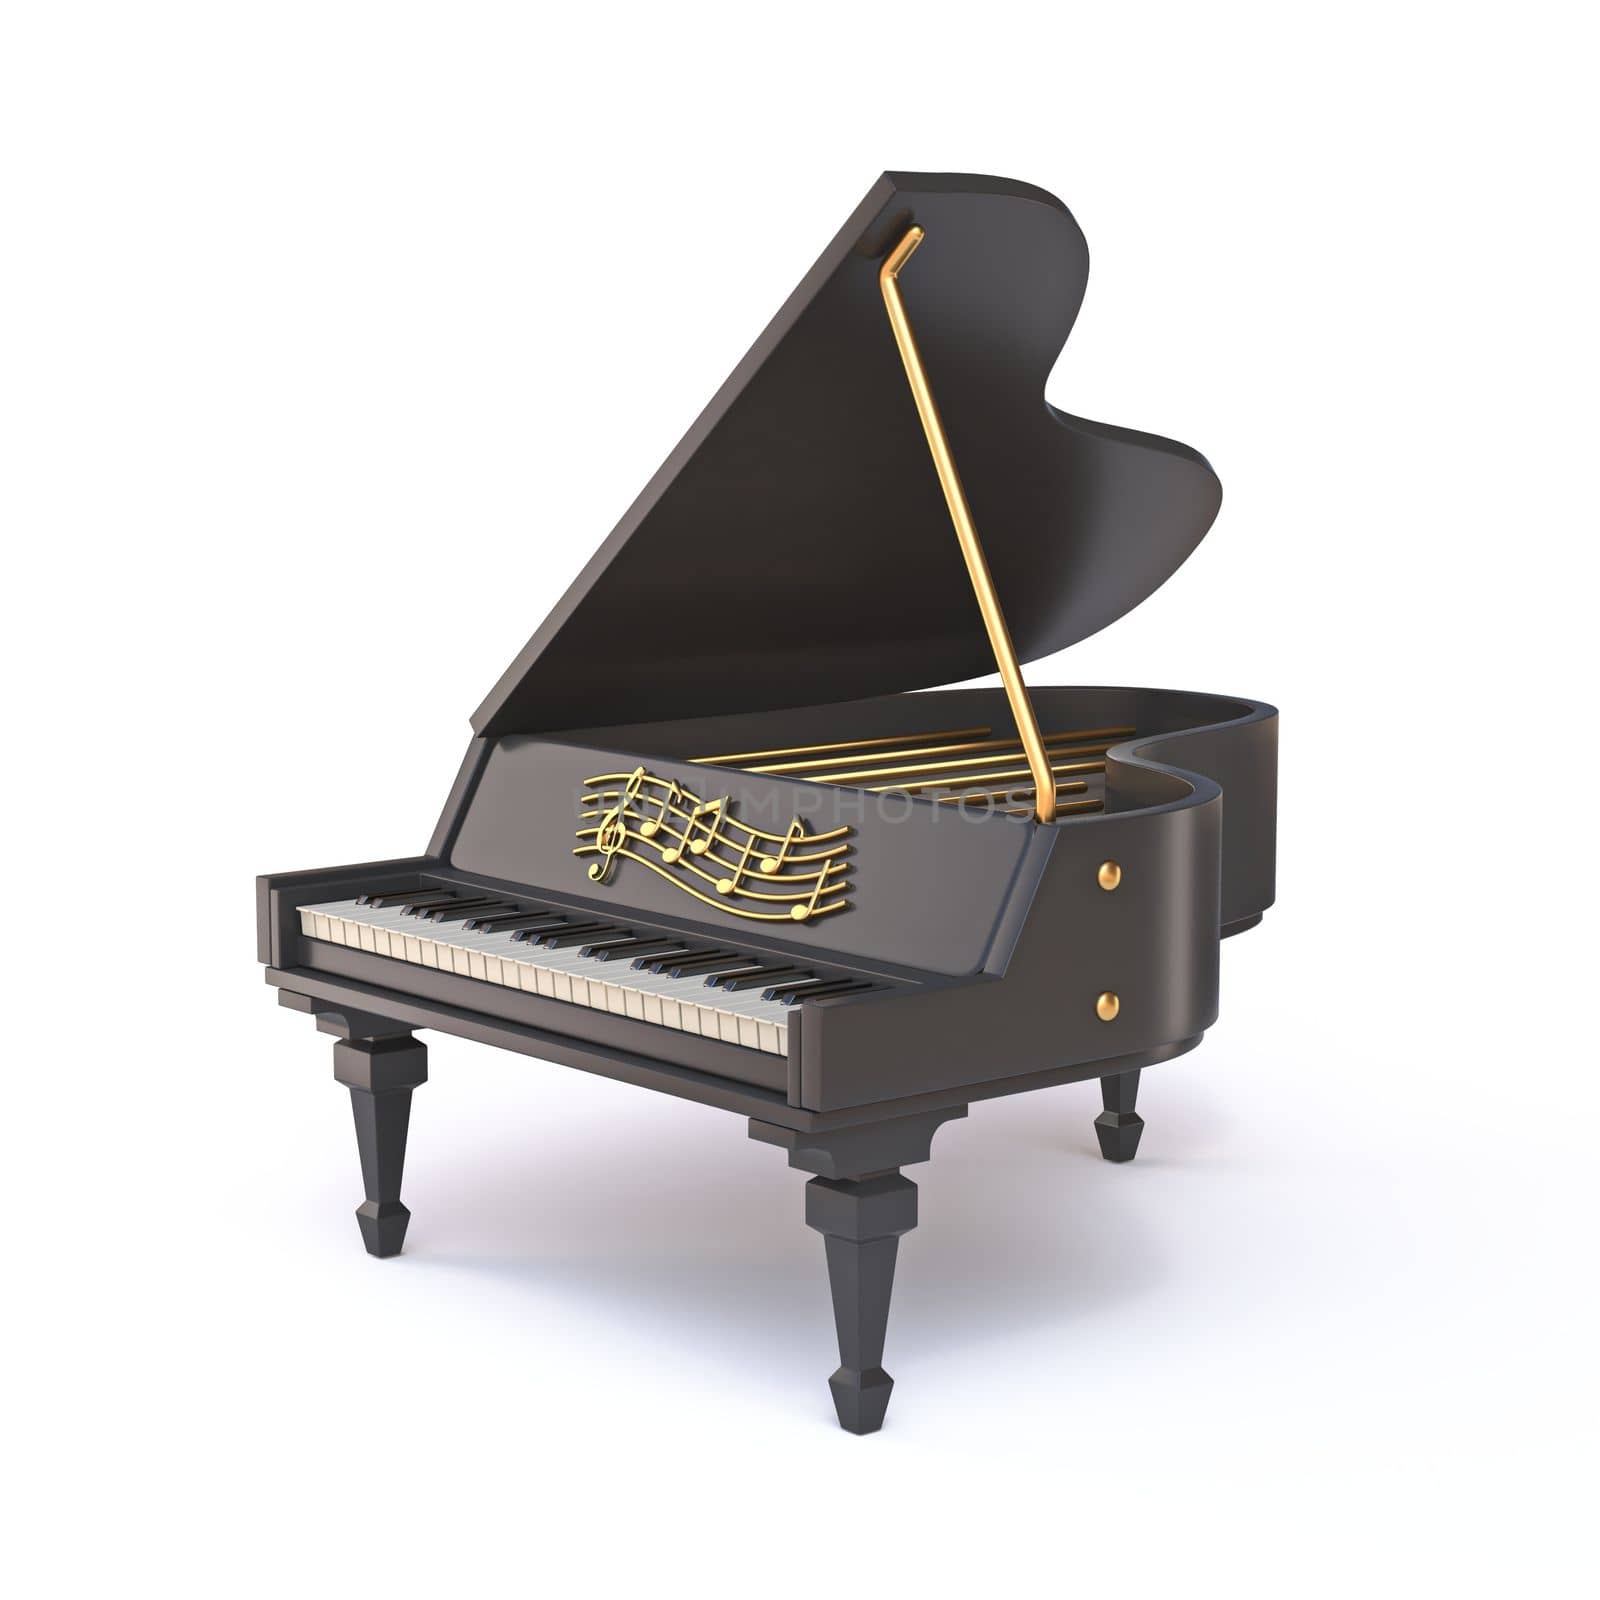 Piano toy 3D rendering illustration isolated on white background